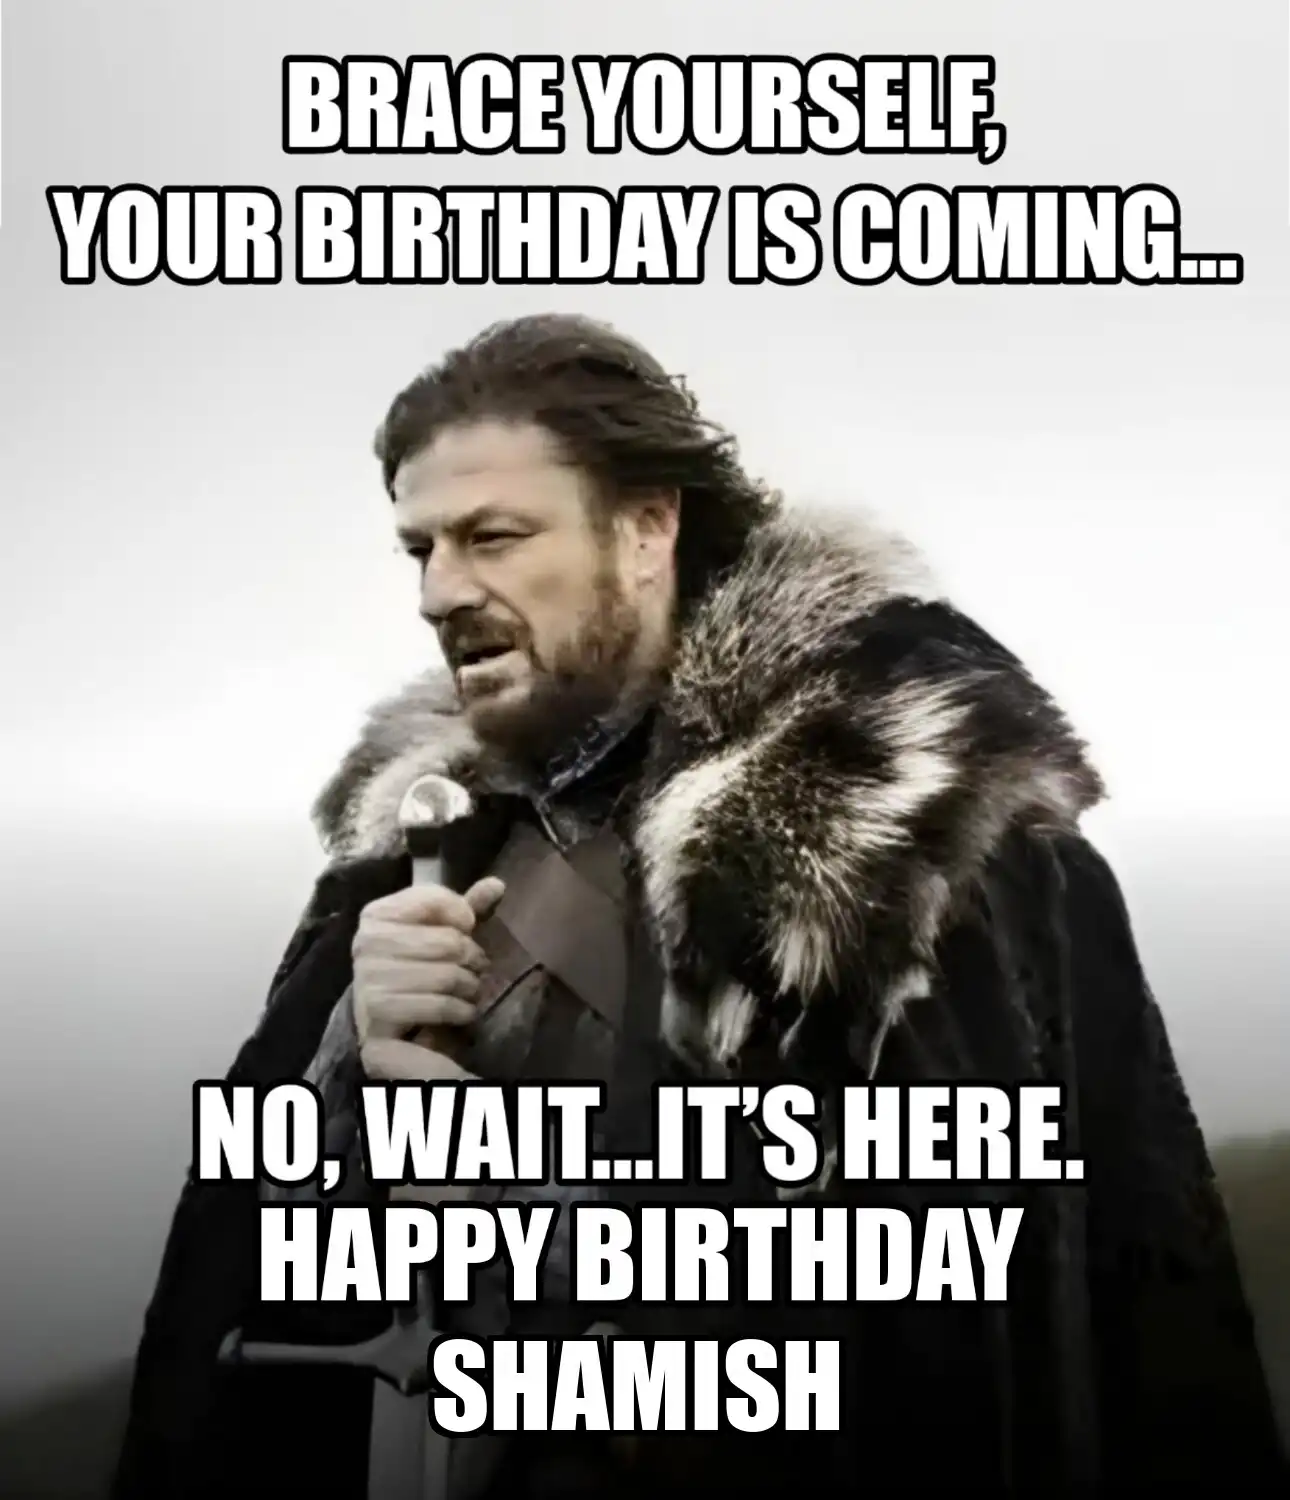 Happy Birthday Shamish Brace Yourself Your Birthday Is Coming Meme